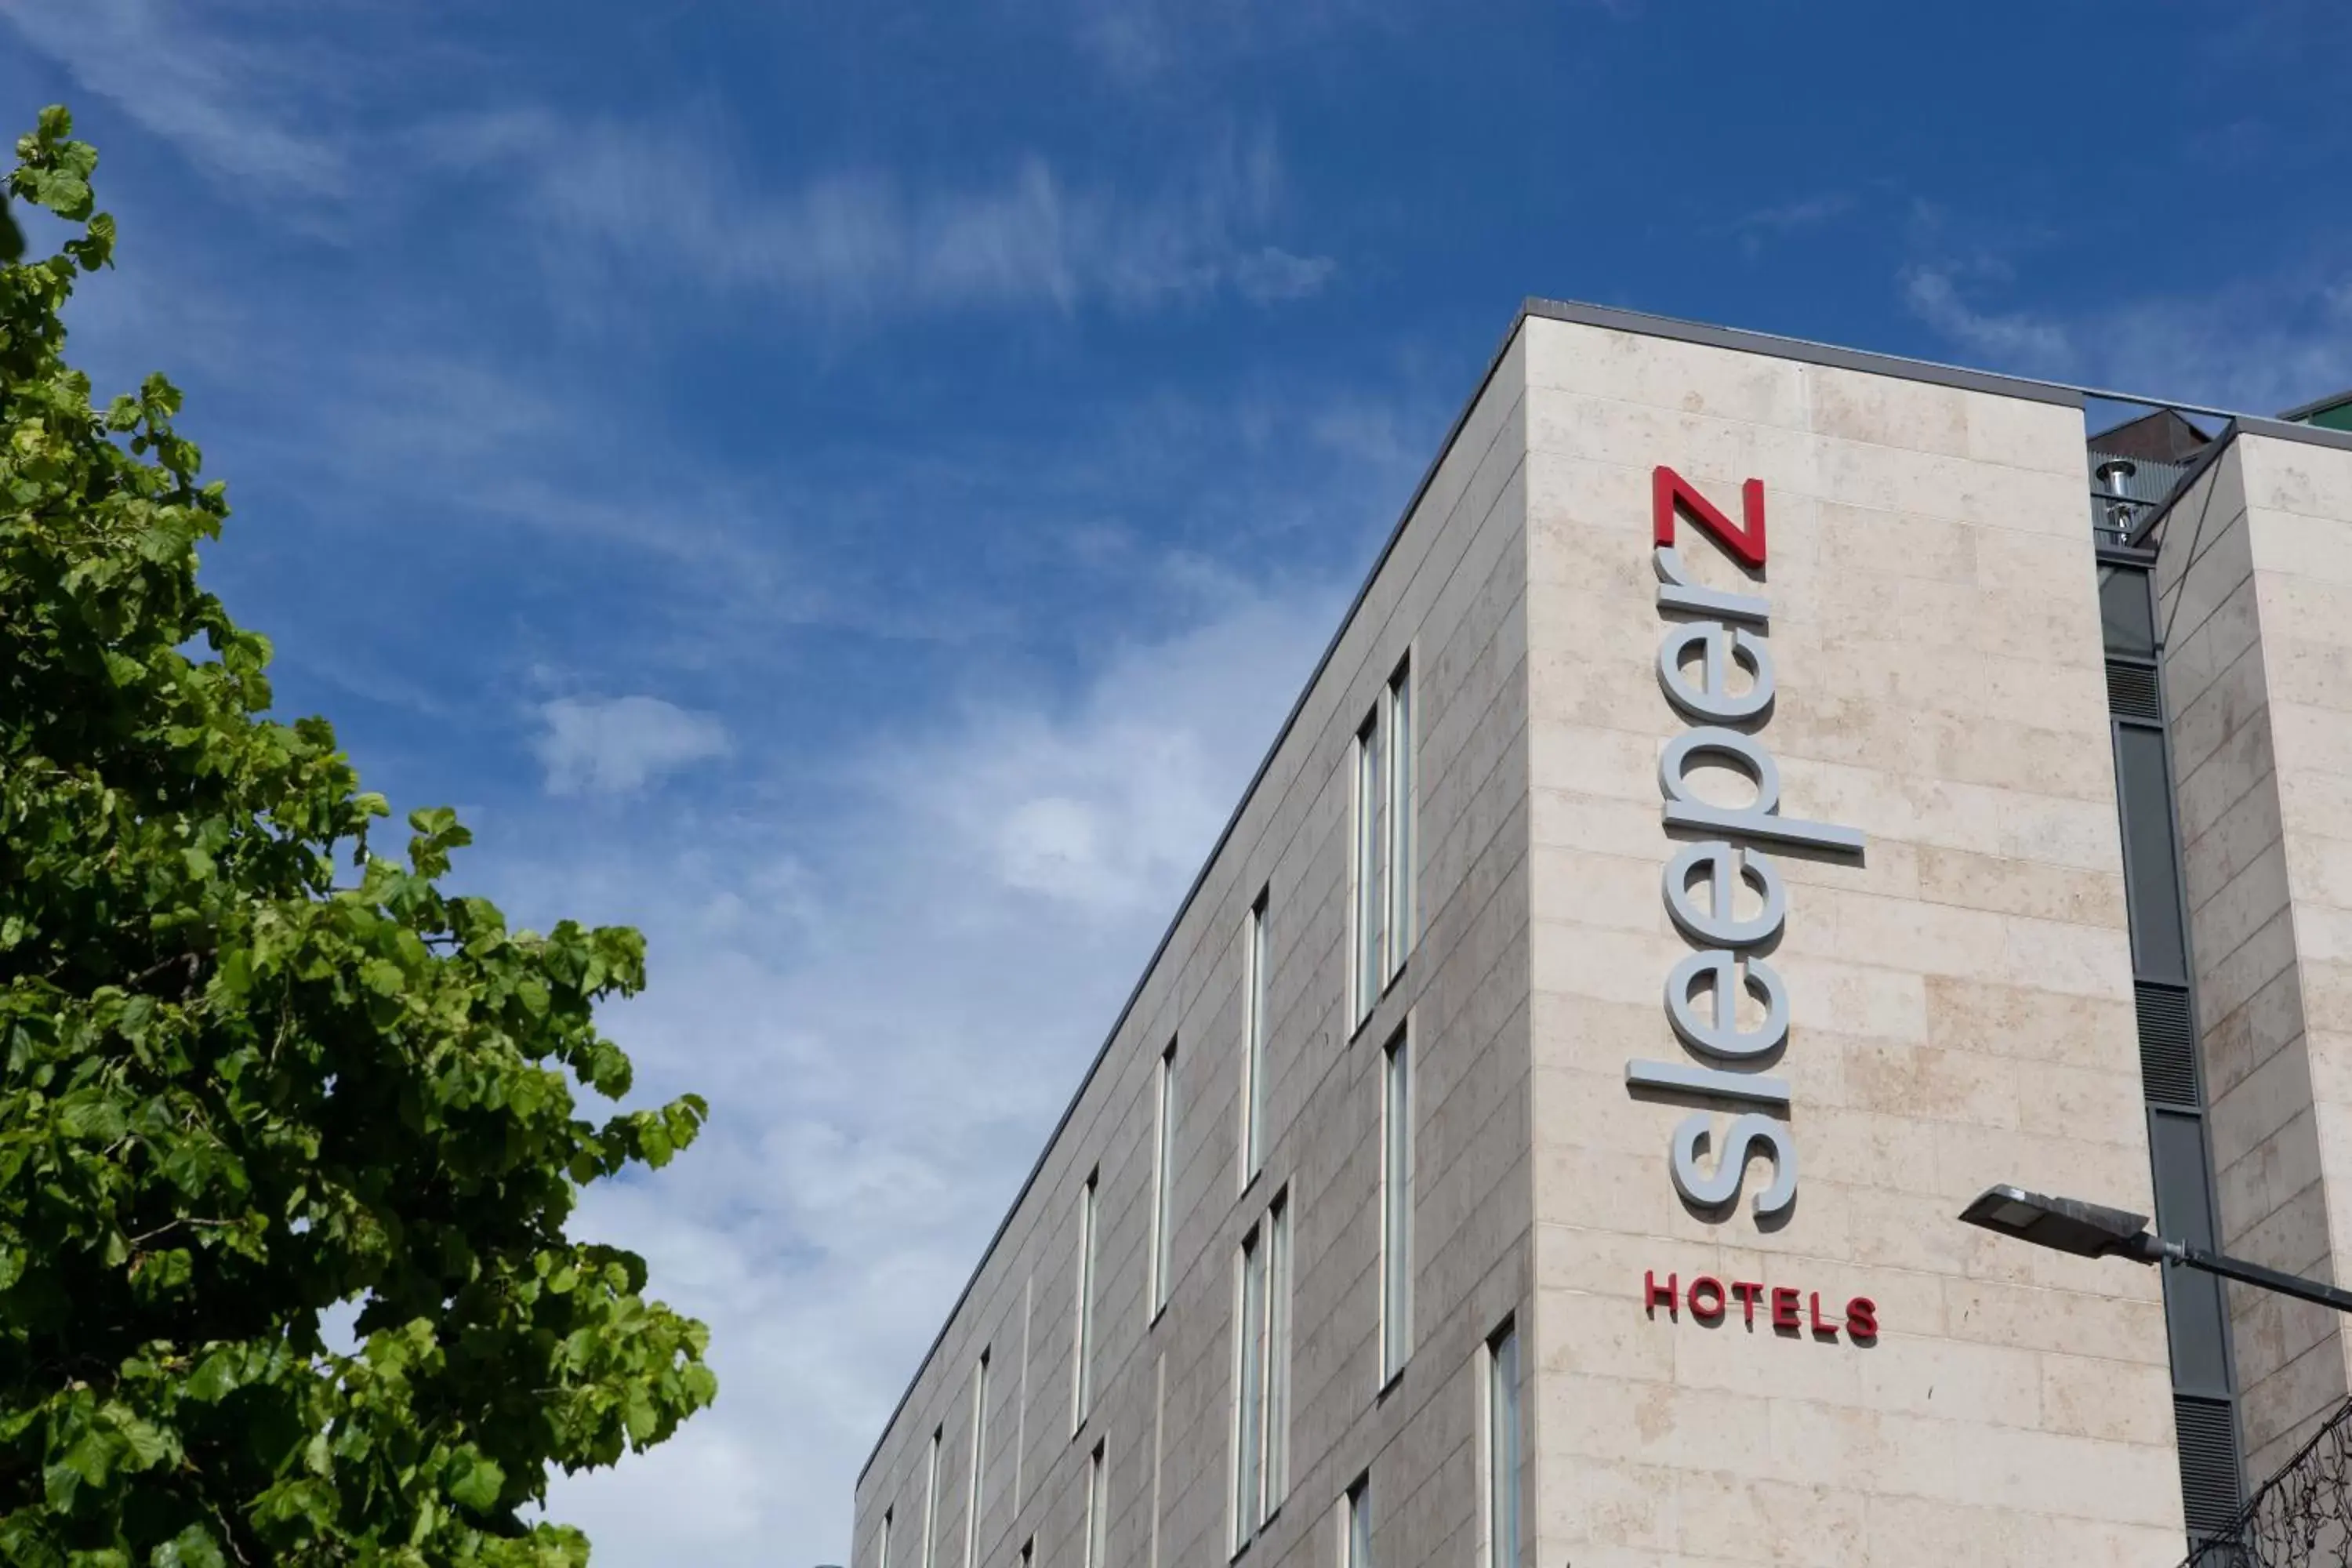 Property building in Sleeperz Hotel Cardiff